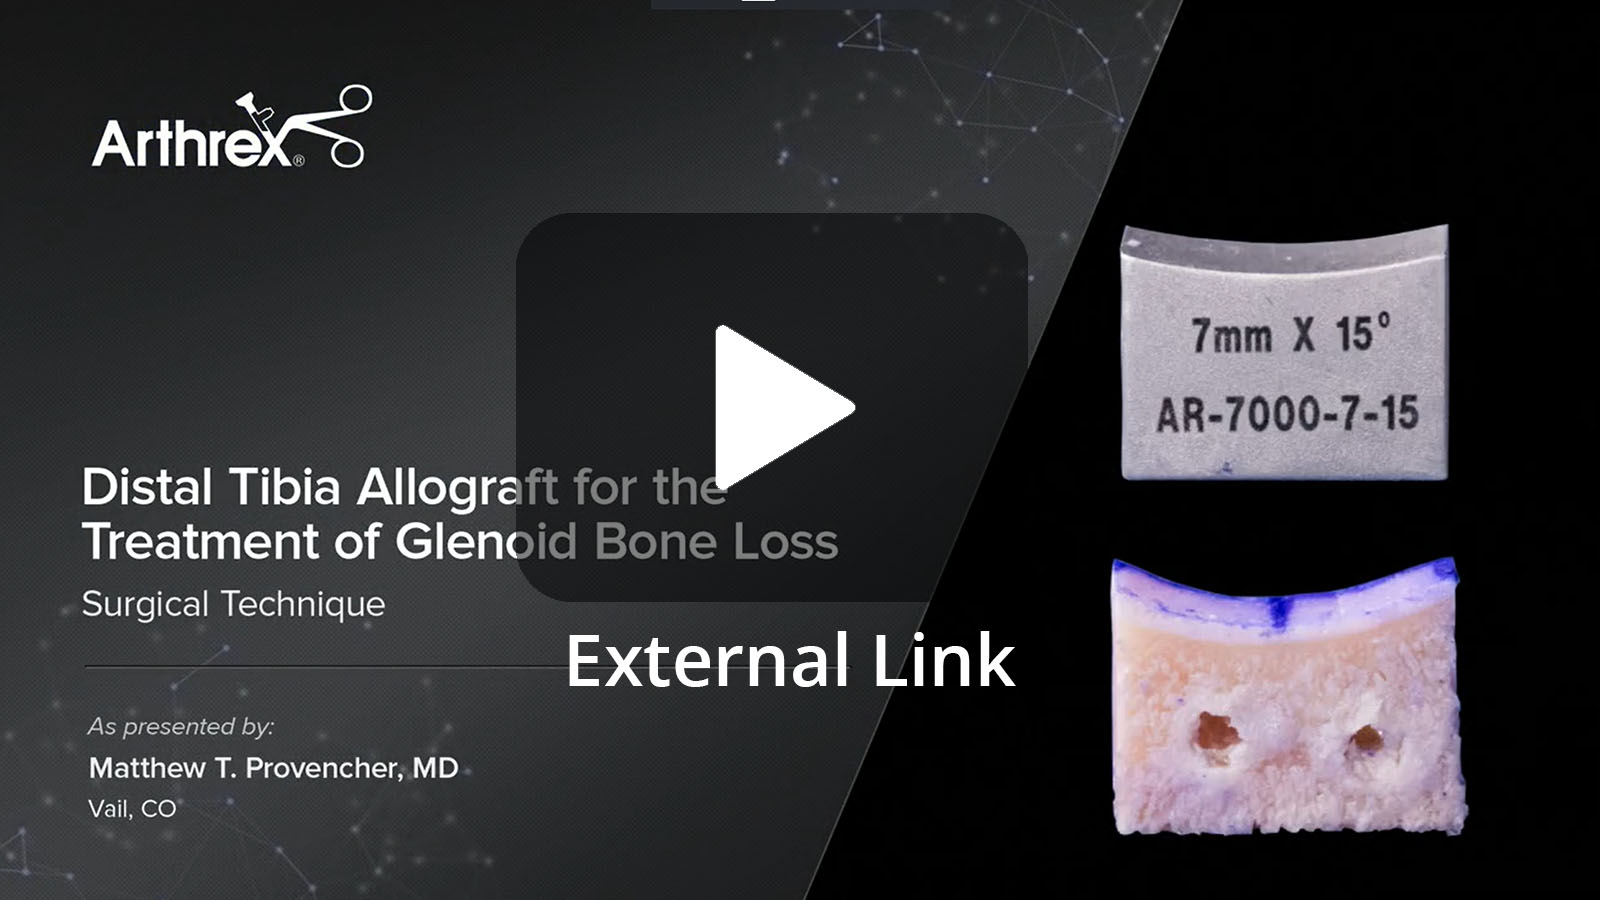 Matthew T. Provencher, MD demonstrates the use of a distal tibia allograft for anterior glenoid reconstruction when faced with significant bone loss. He uses the Distal Tibia Allograft Workstation which helps to accurately template, prepare and fixate the desired bone block. (External Link)